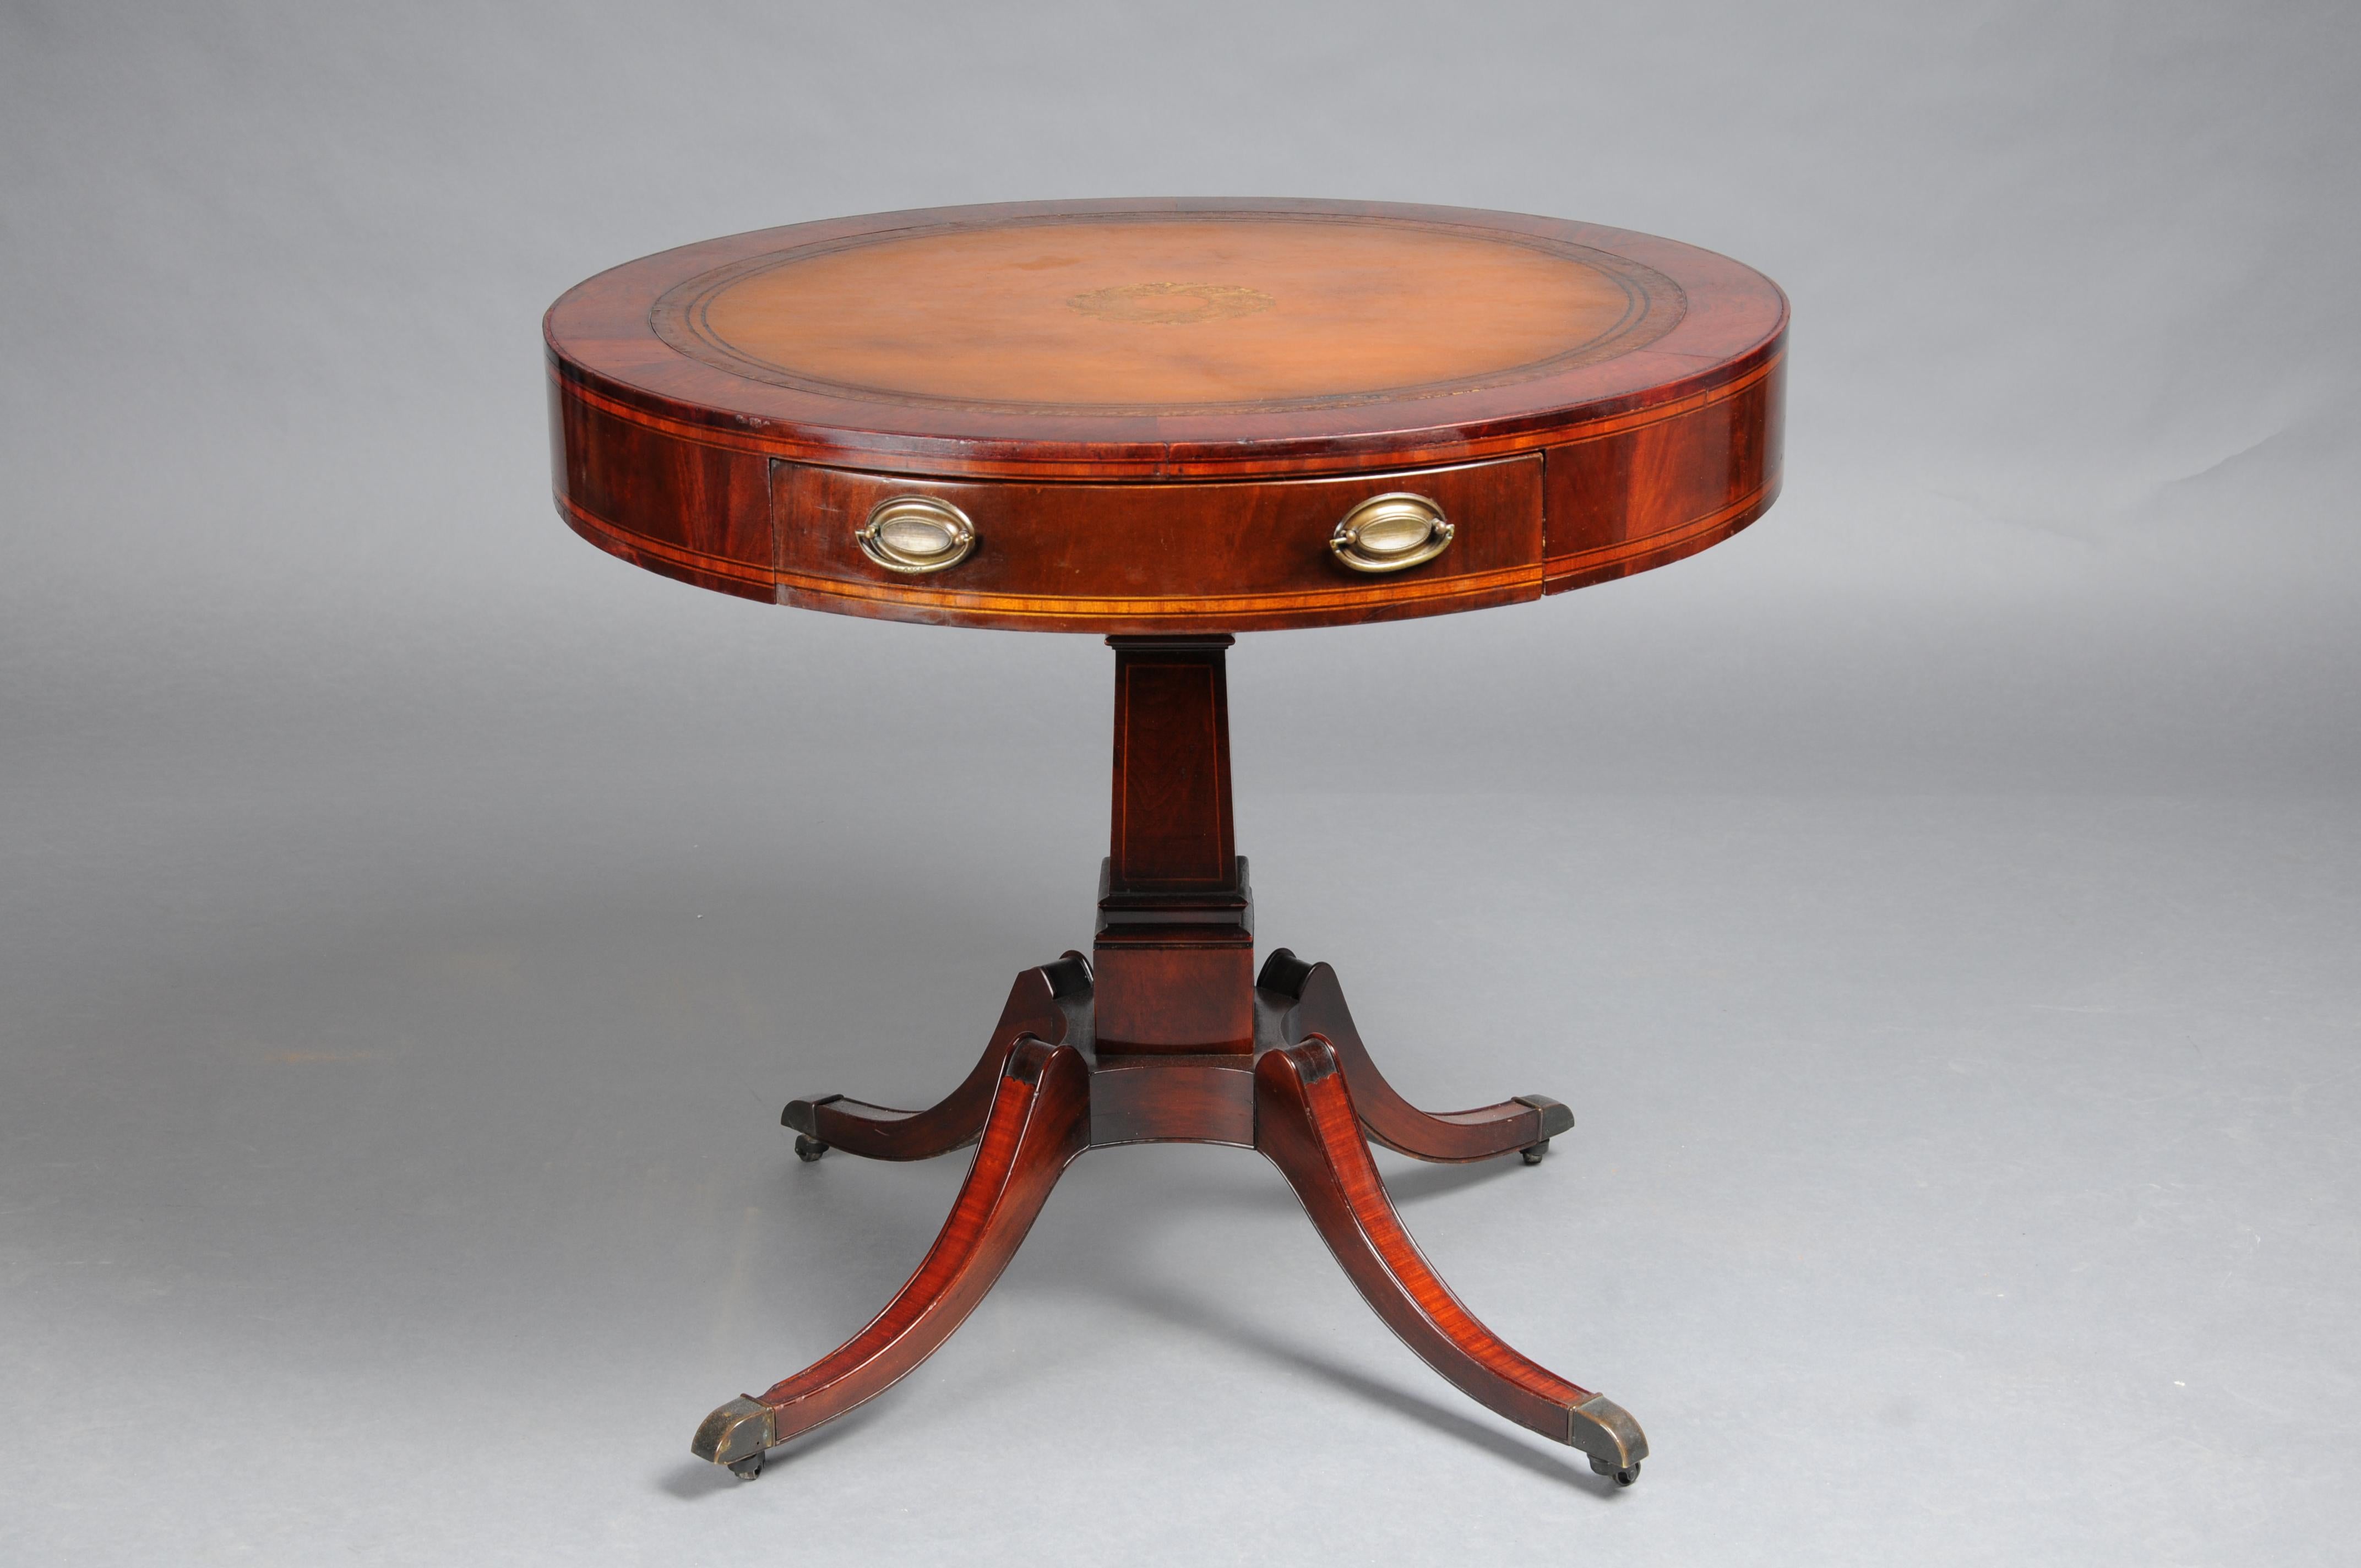 Antique classic English side table with leather top. 19th Century

Solid mahogany wood with mahogany. Round cover plate with leather plate and gold embossing. Square and profiled column shaft ending with four curved legs standing on brass roller